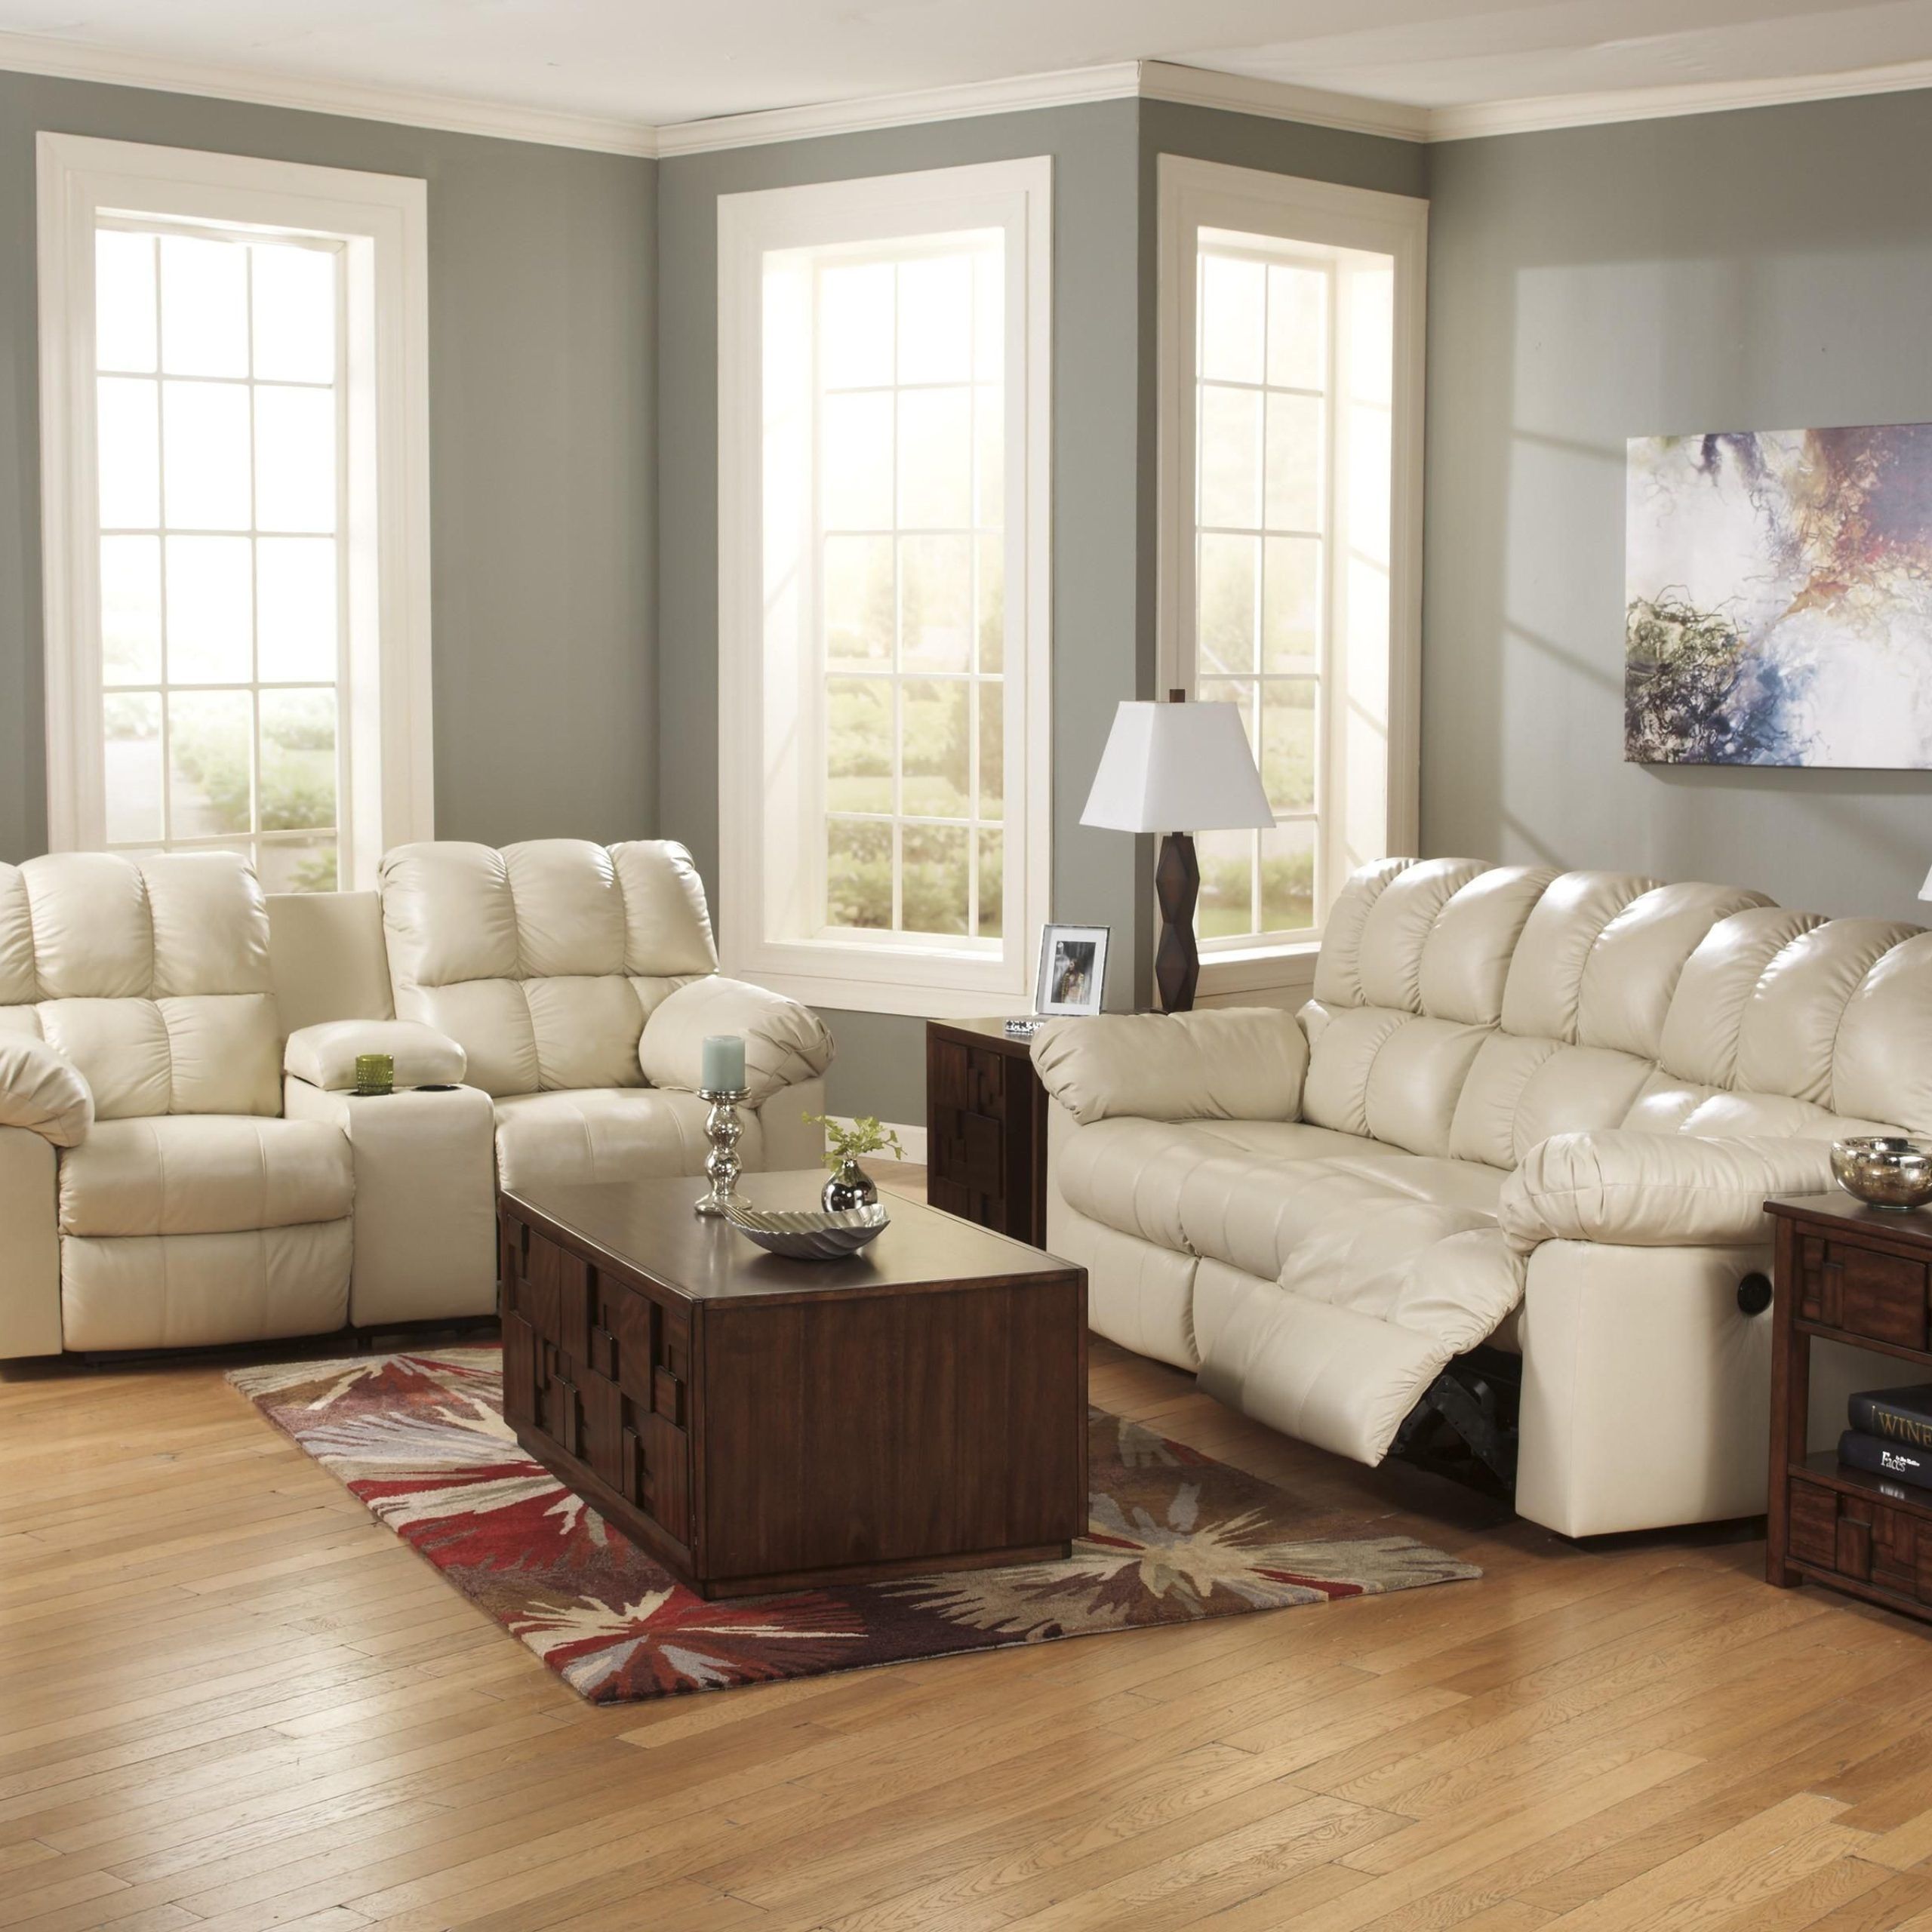 20 Inspirations Cream Colored Sofas | Sofa Ideas Within Sofas In Cream (View 2 of 20)